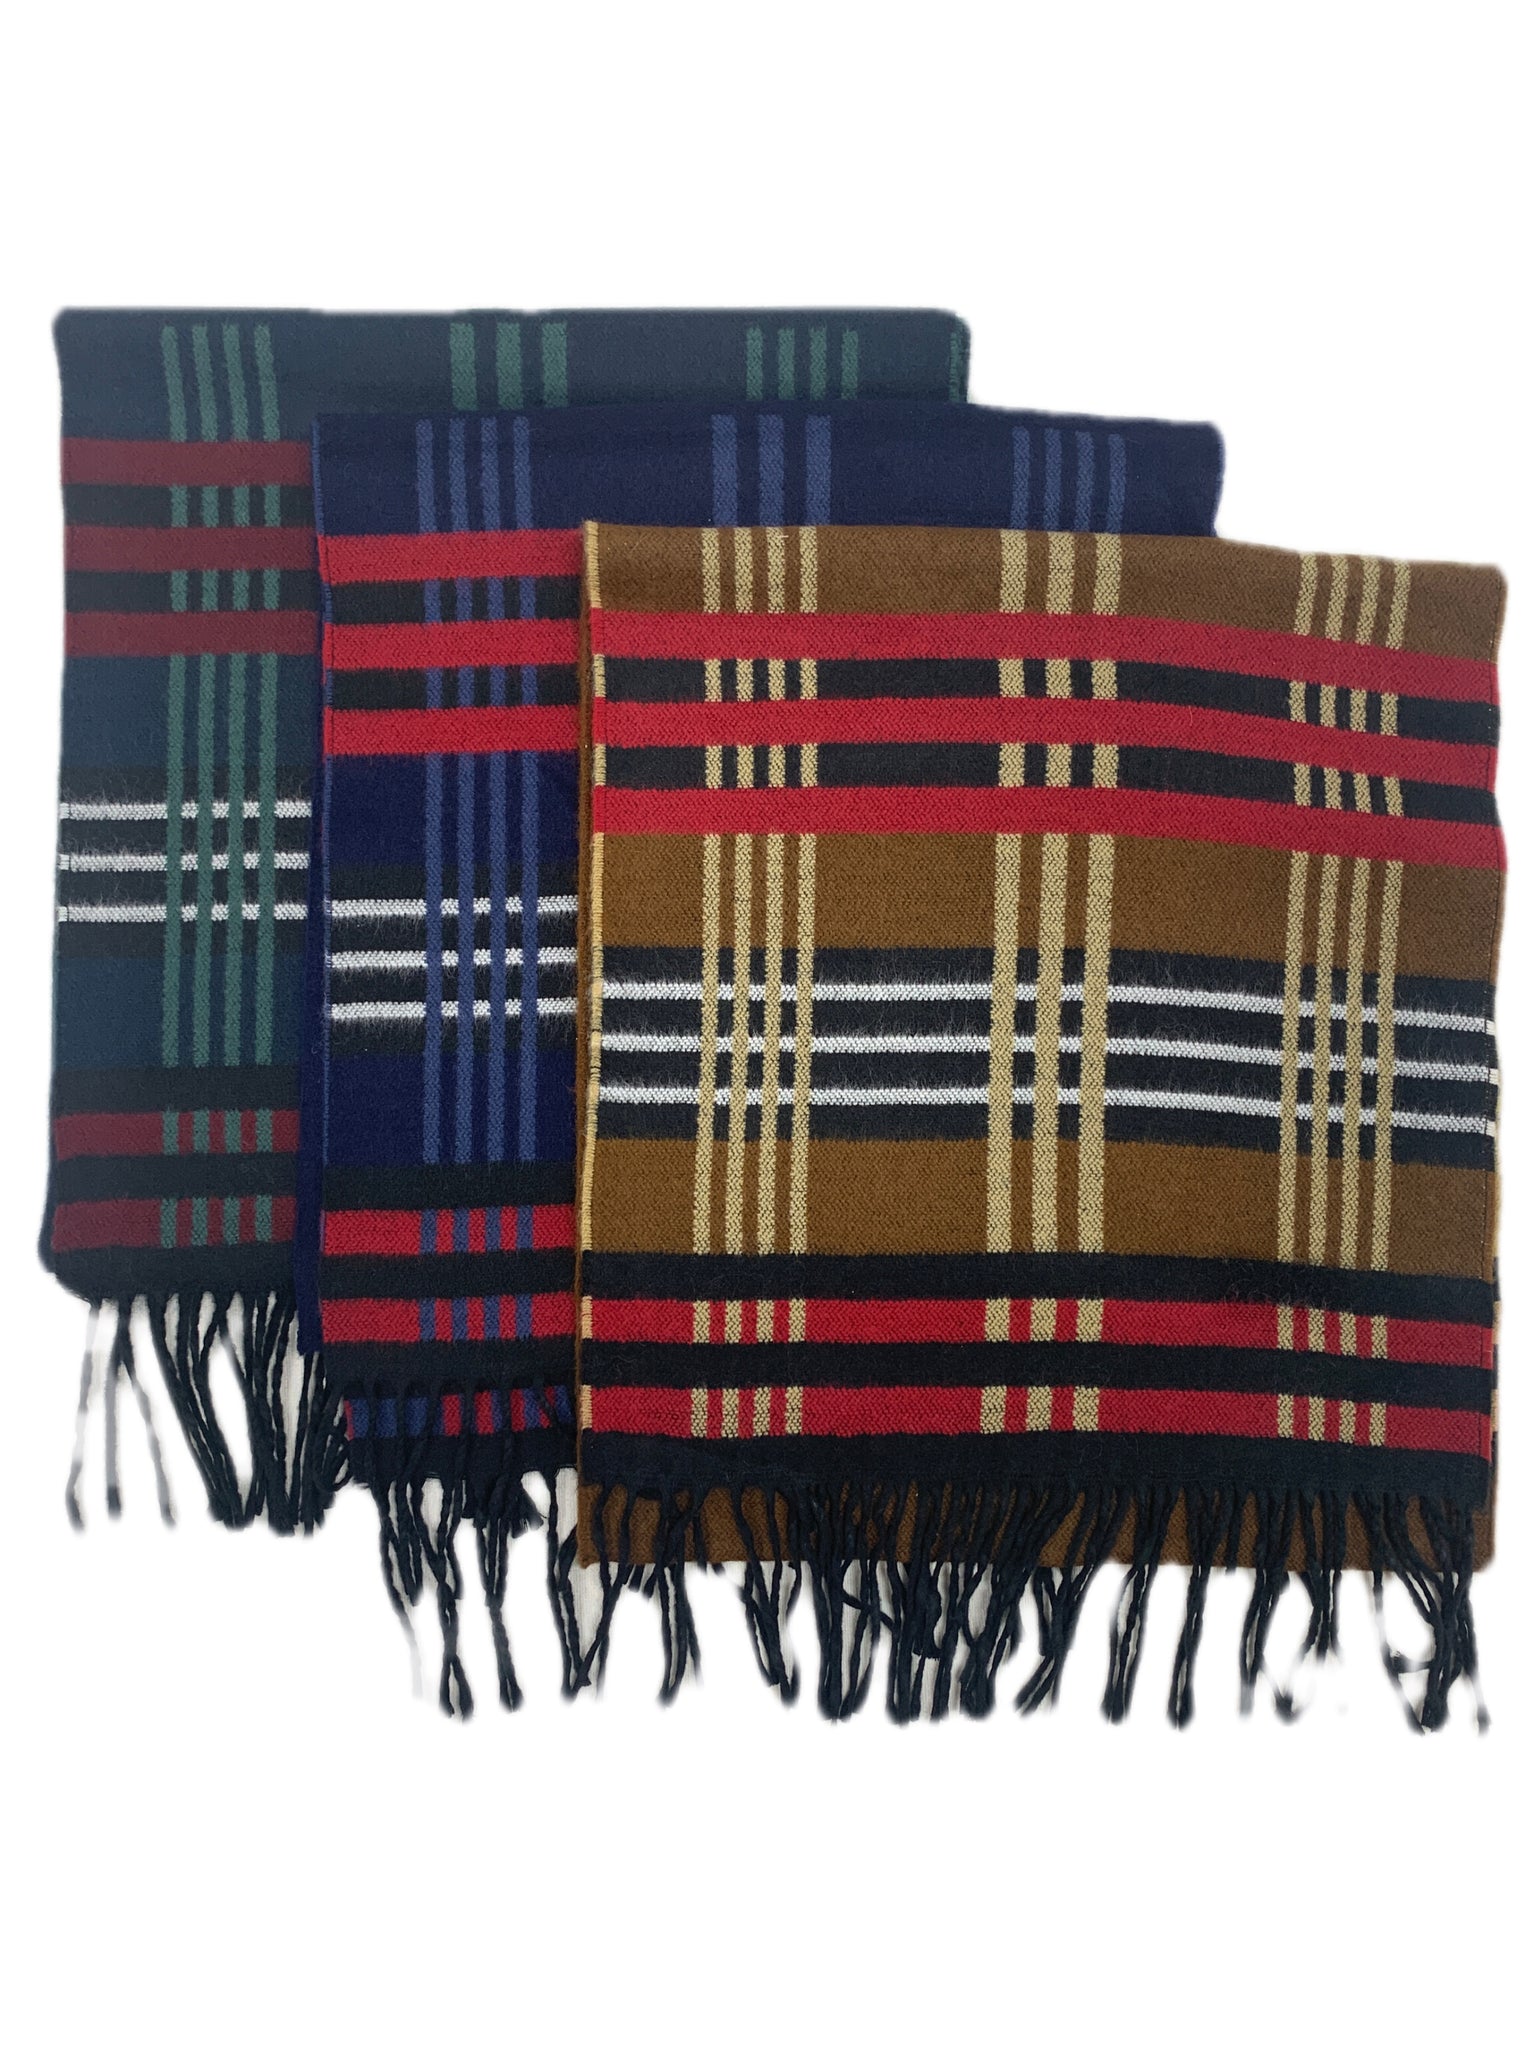 SCOTT - Plaid Mélange Scarves - Made in Italy